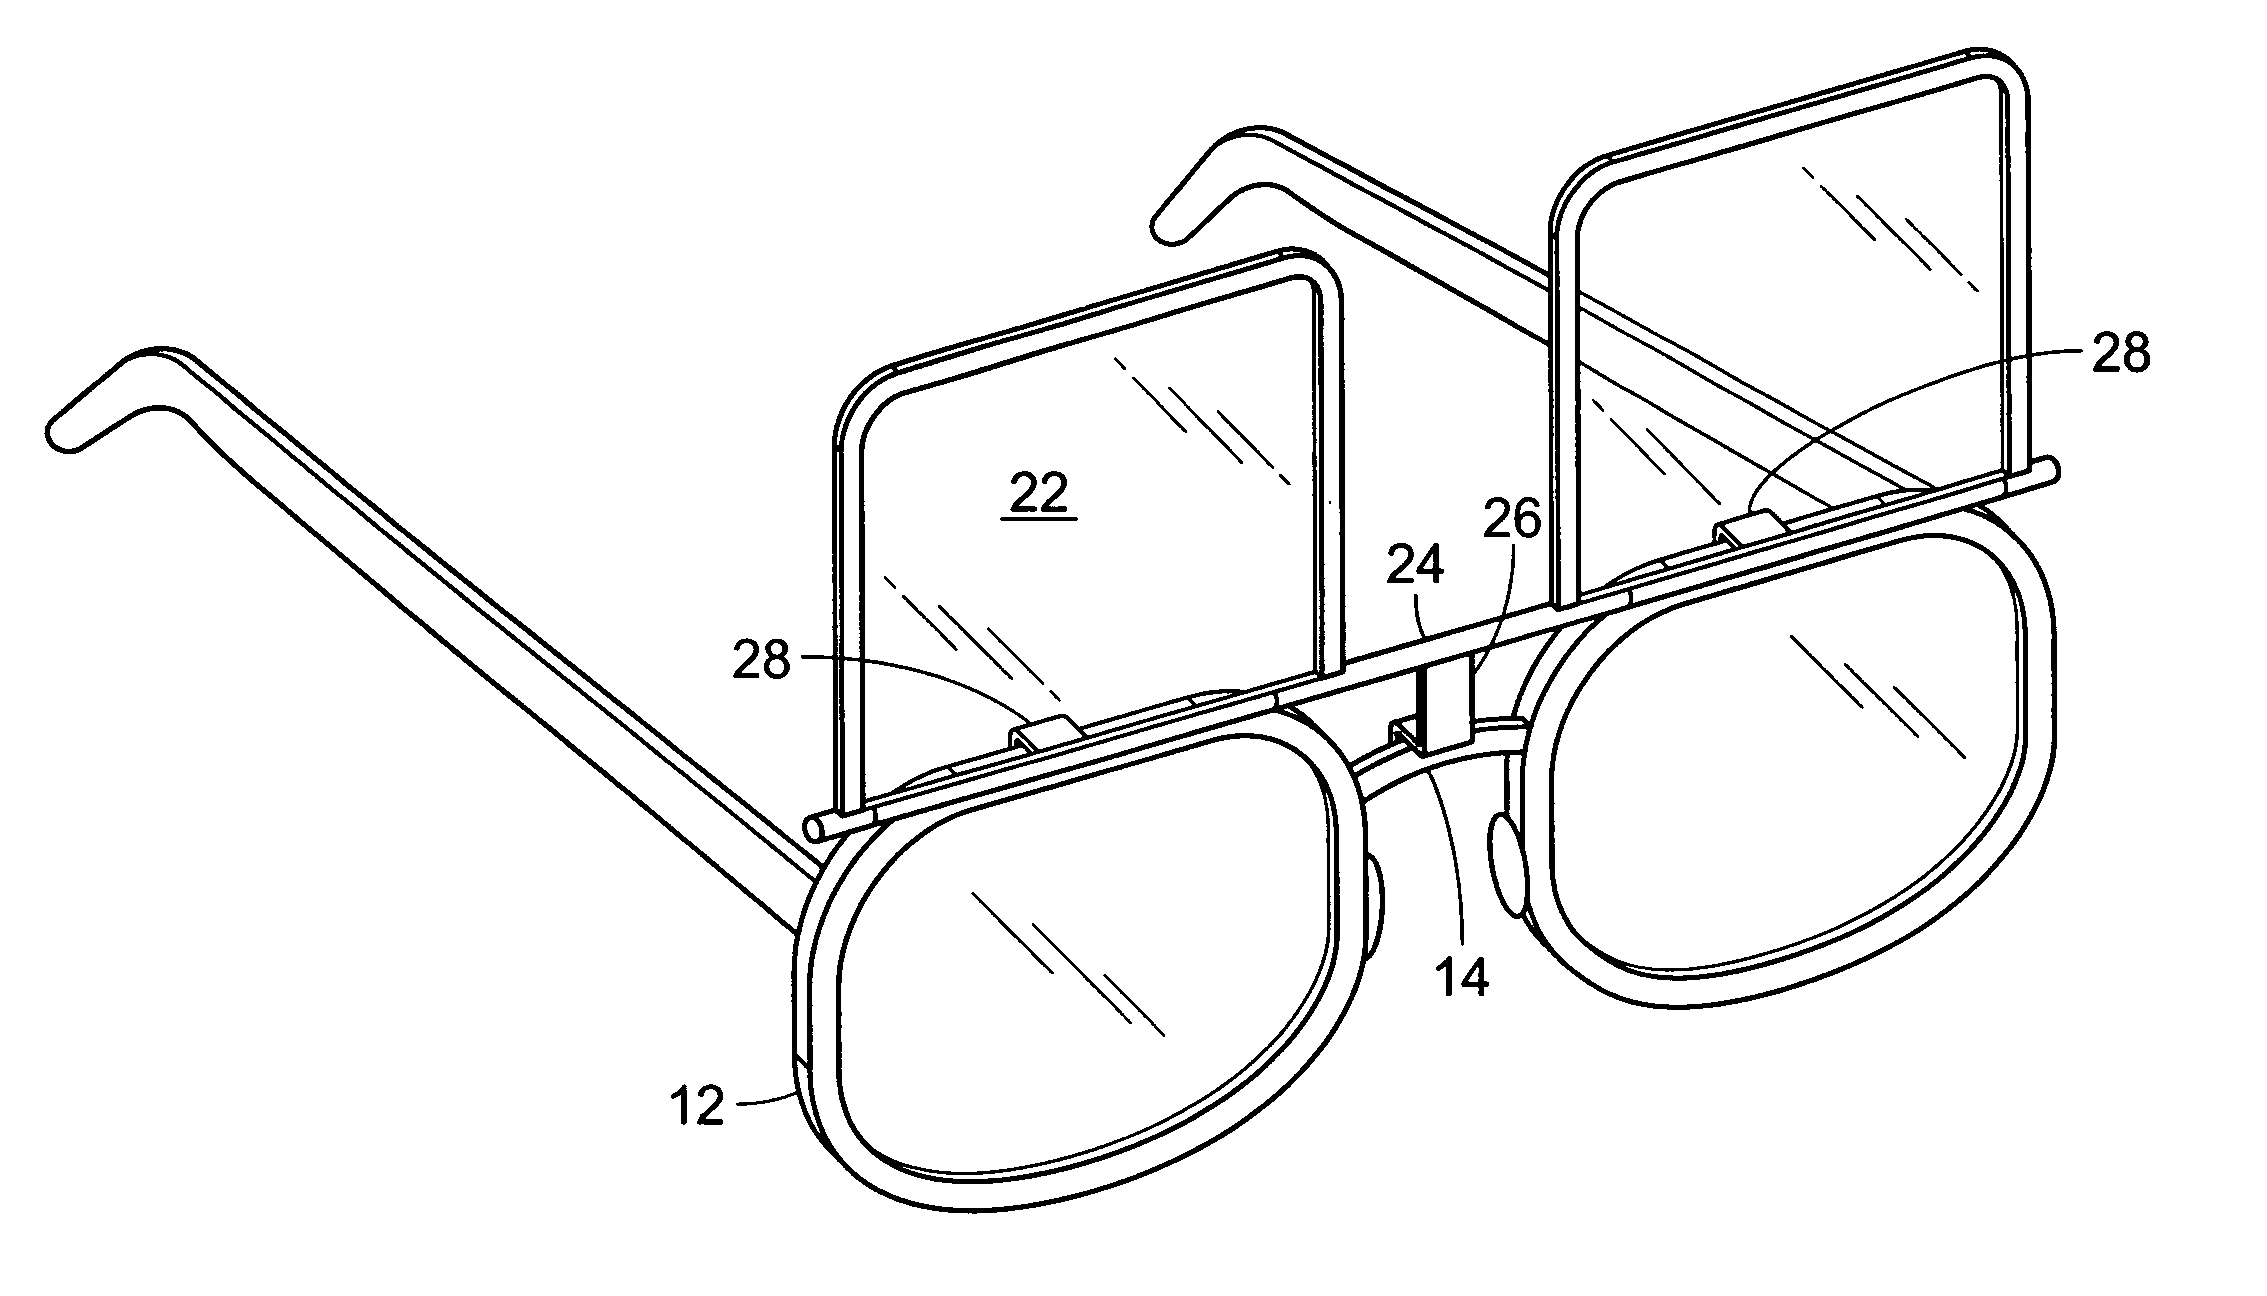 Clip-on magnifying lens attachment for eyeglasses